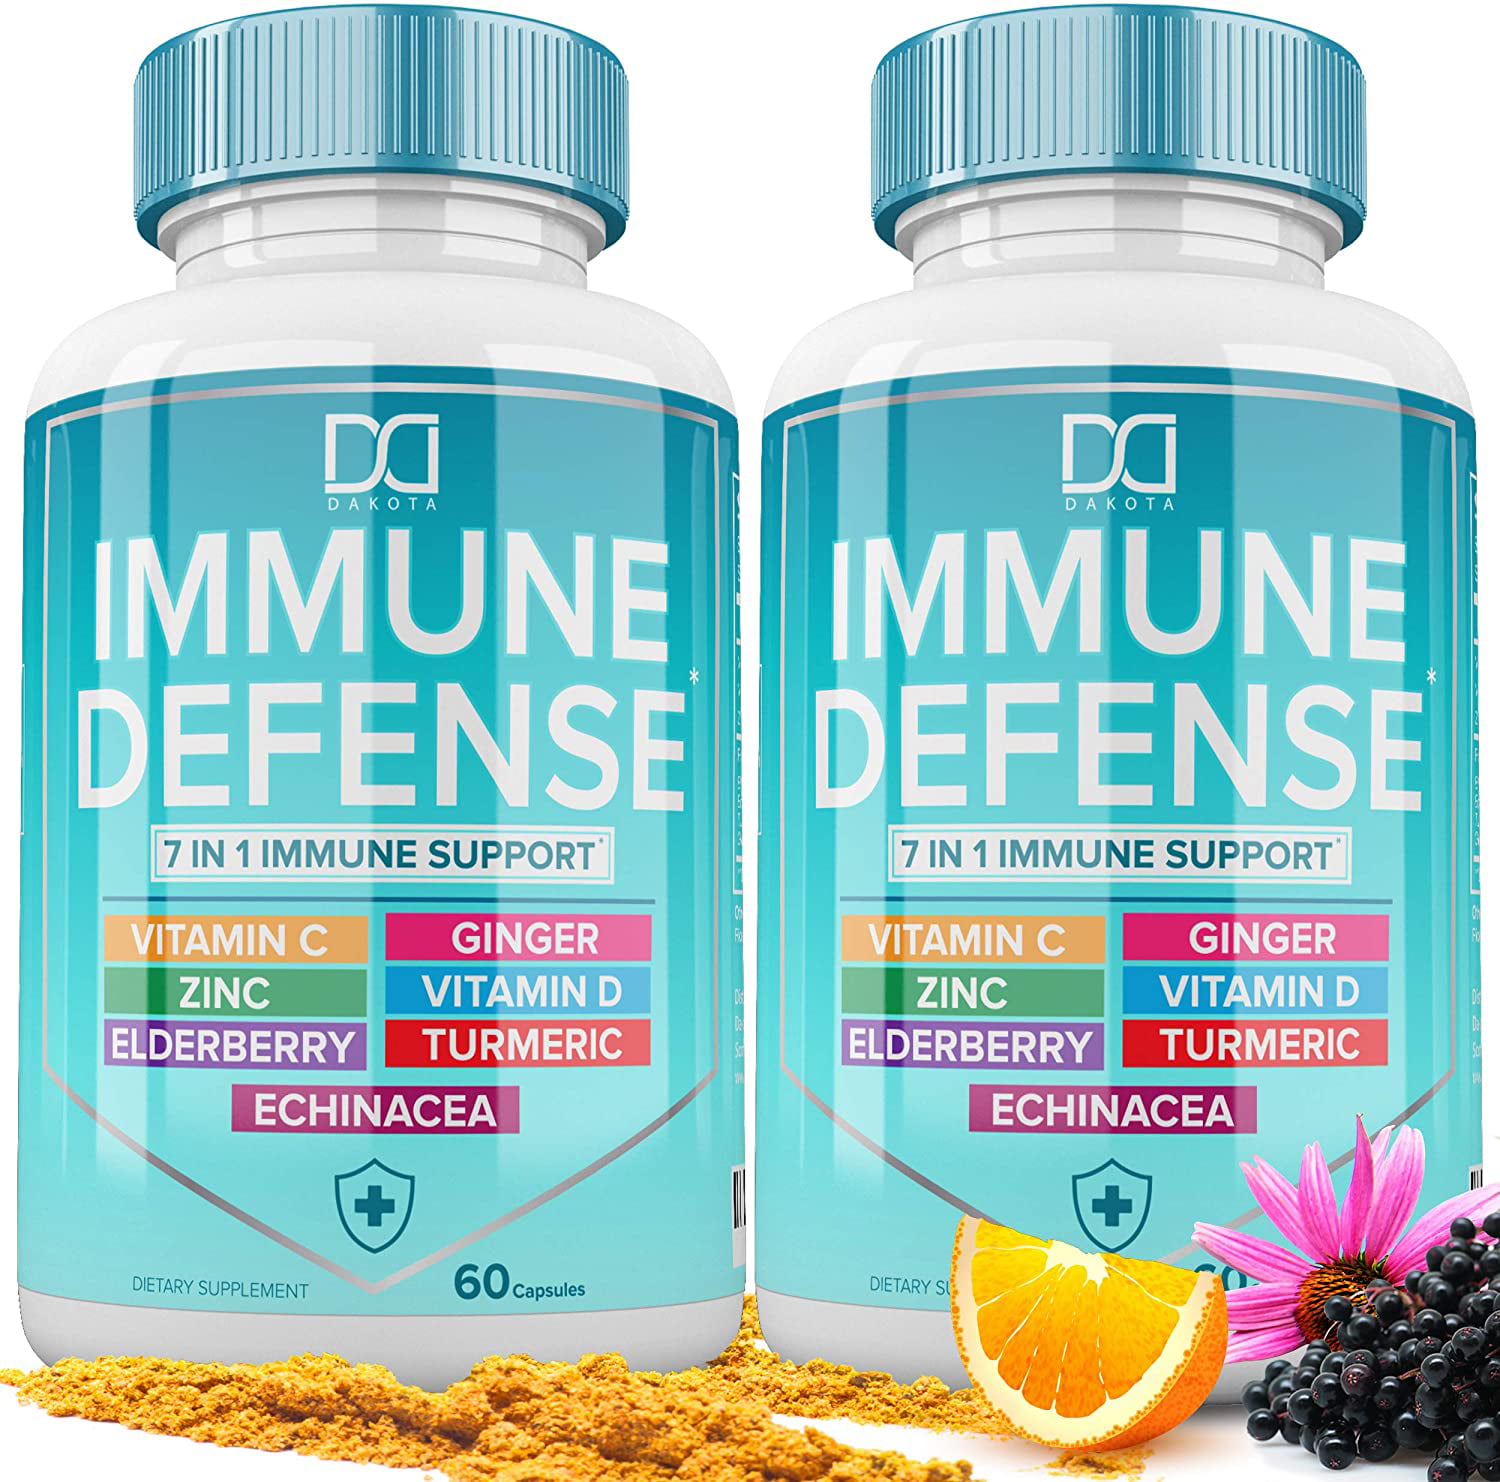 7 in 1 Immune Support Booster Supplement with Elderberry, Vitamin C and